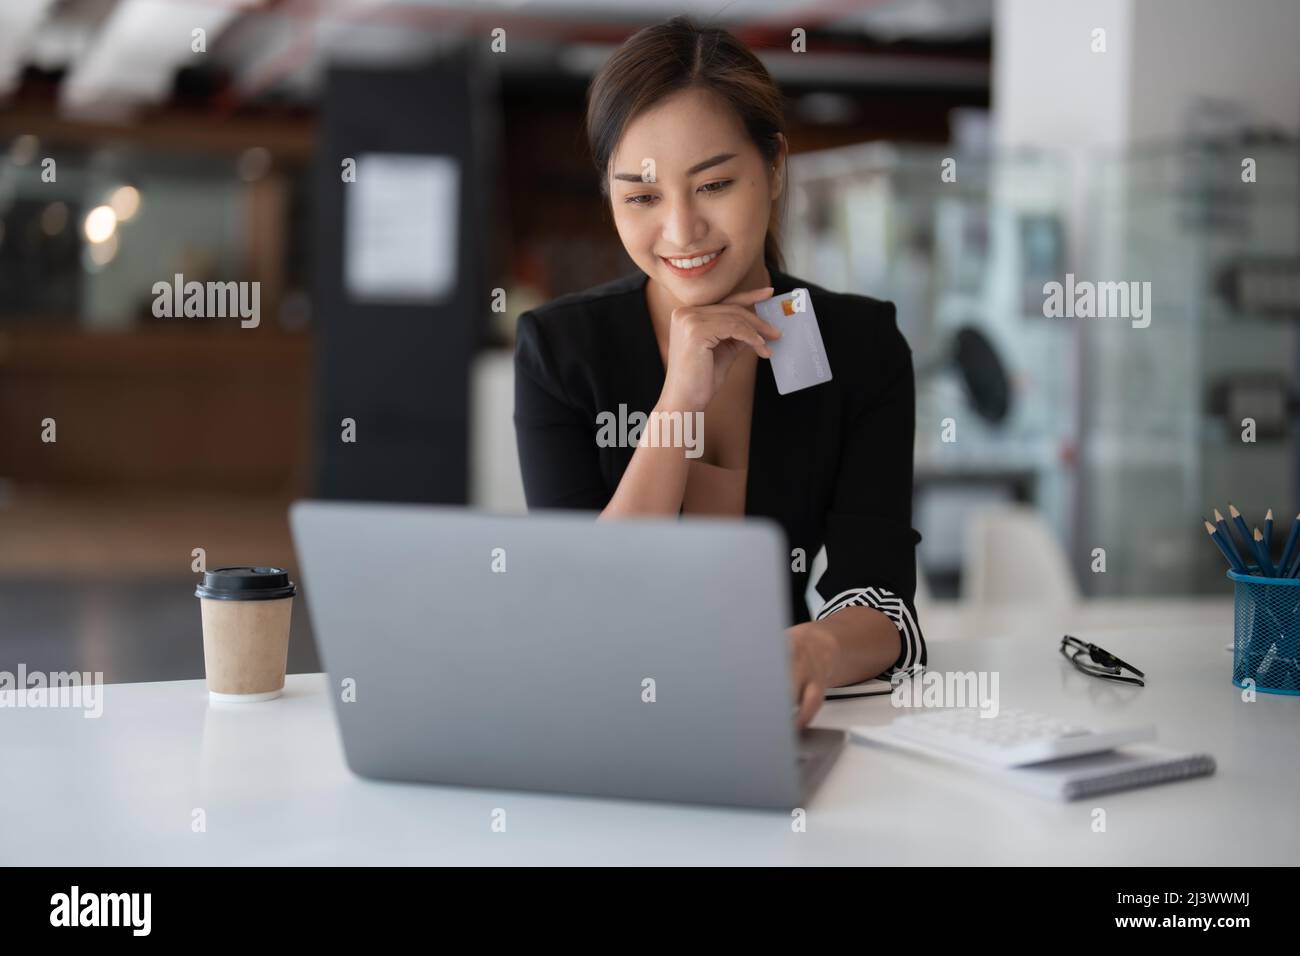 Asian girl making online payment using laptop and credit card for shopping at home Stock Photo